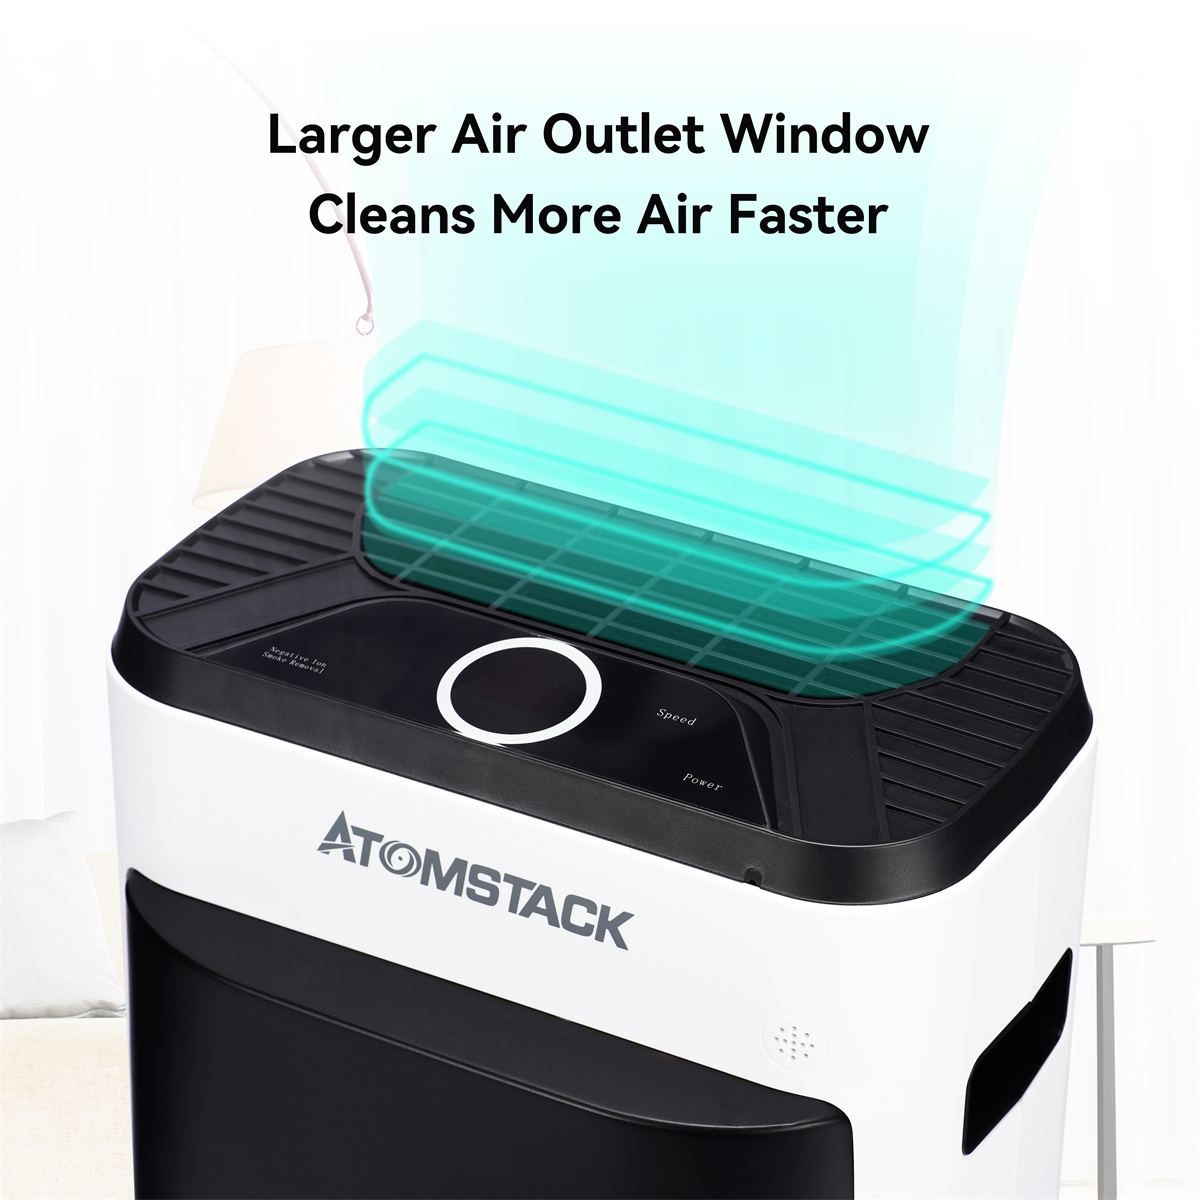 Atomstack-Air-Purifier-Cleaner-Larger-Air-Outlet-For-Laser-Engraving-Machine-1954768-3